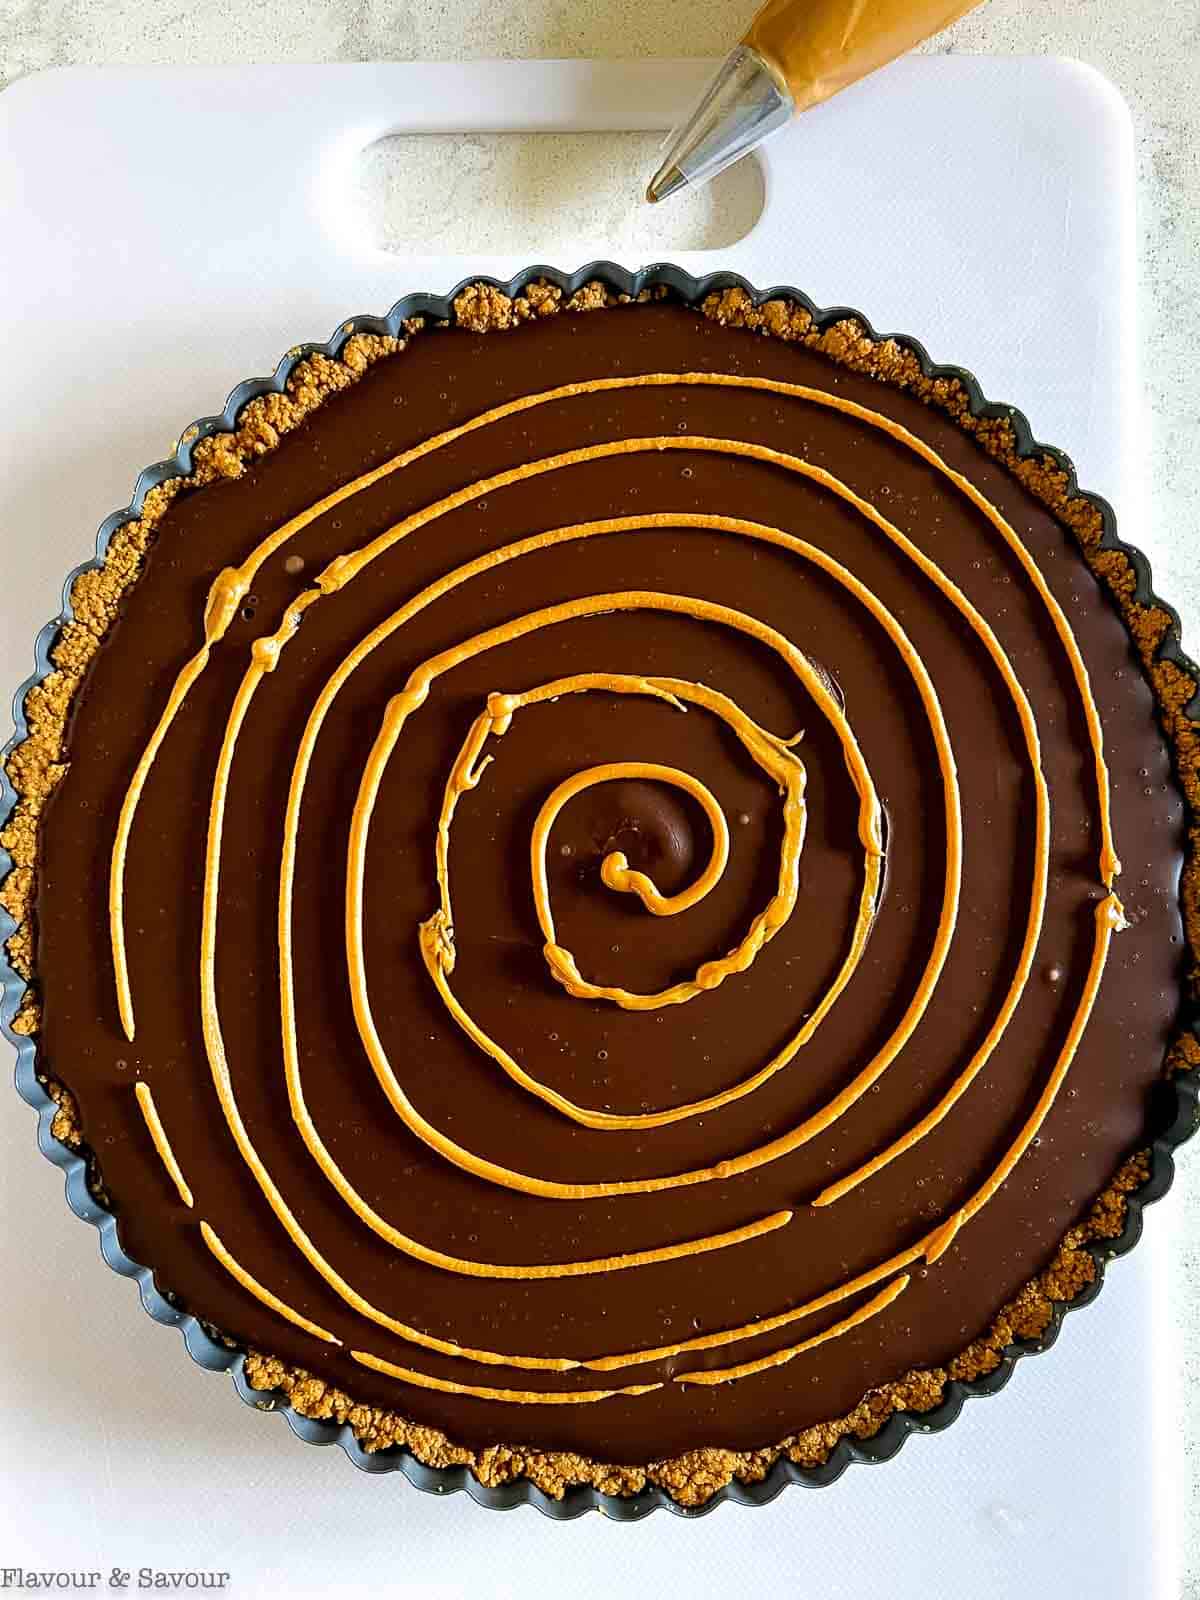 Peanut butter piped in circles on chocolate ganache.